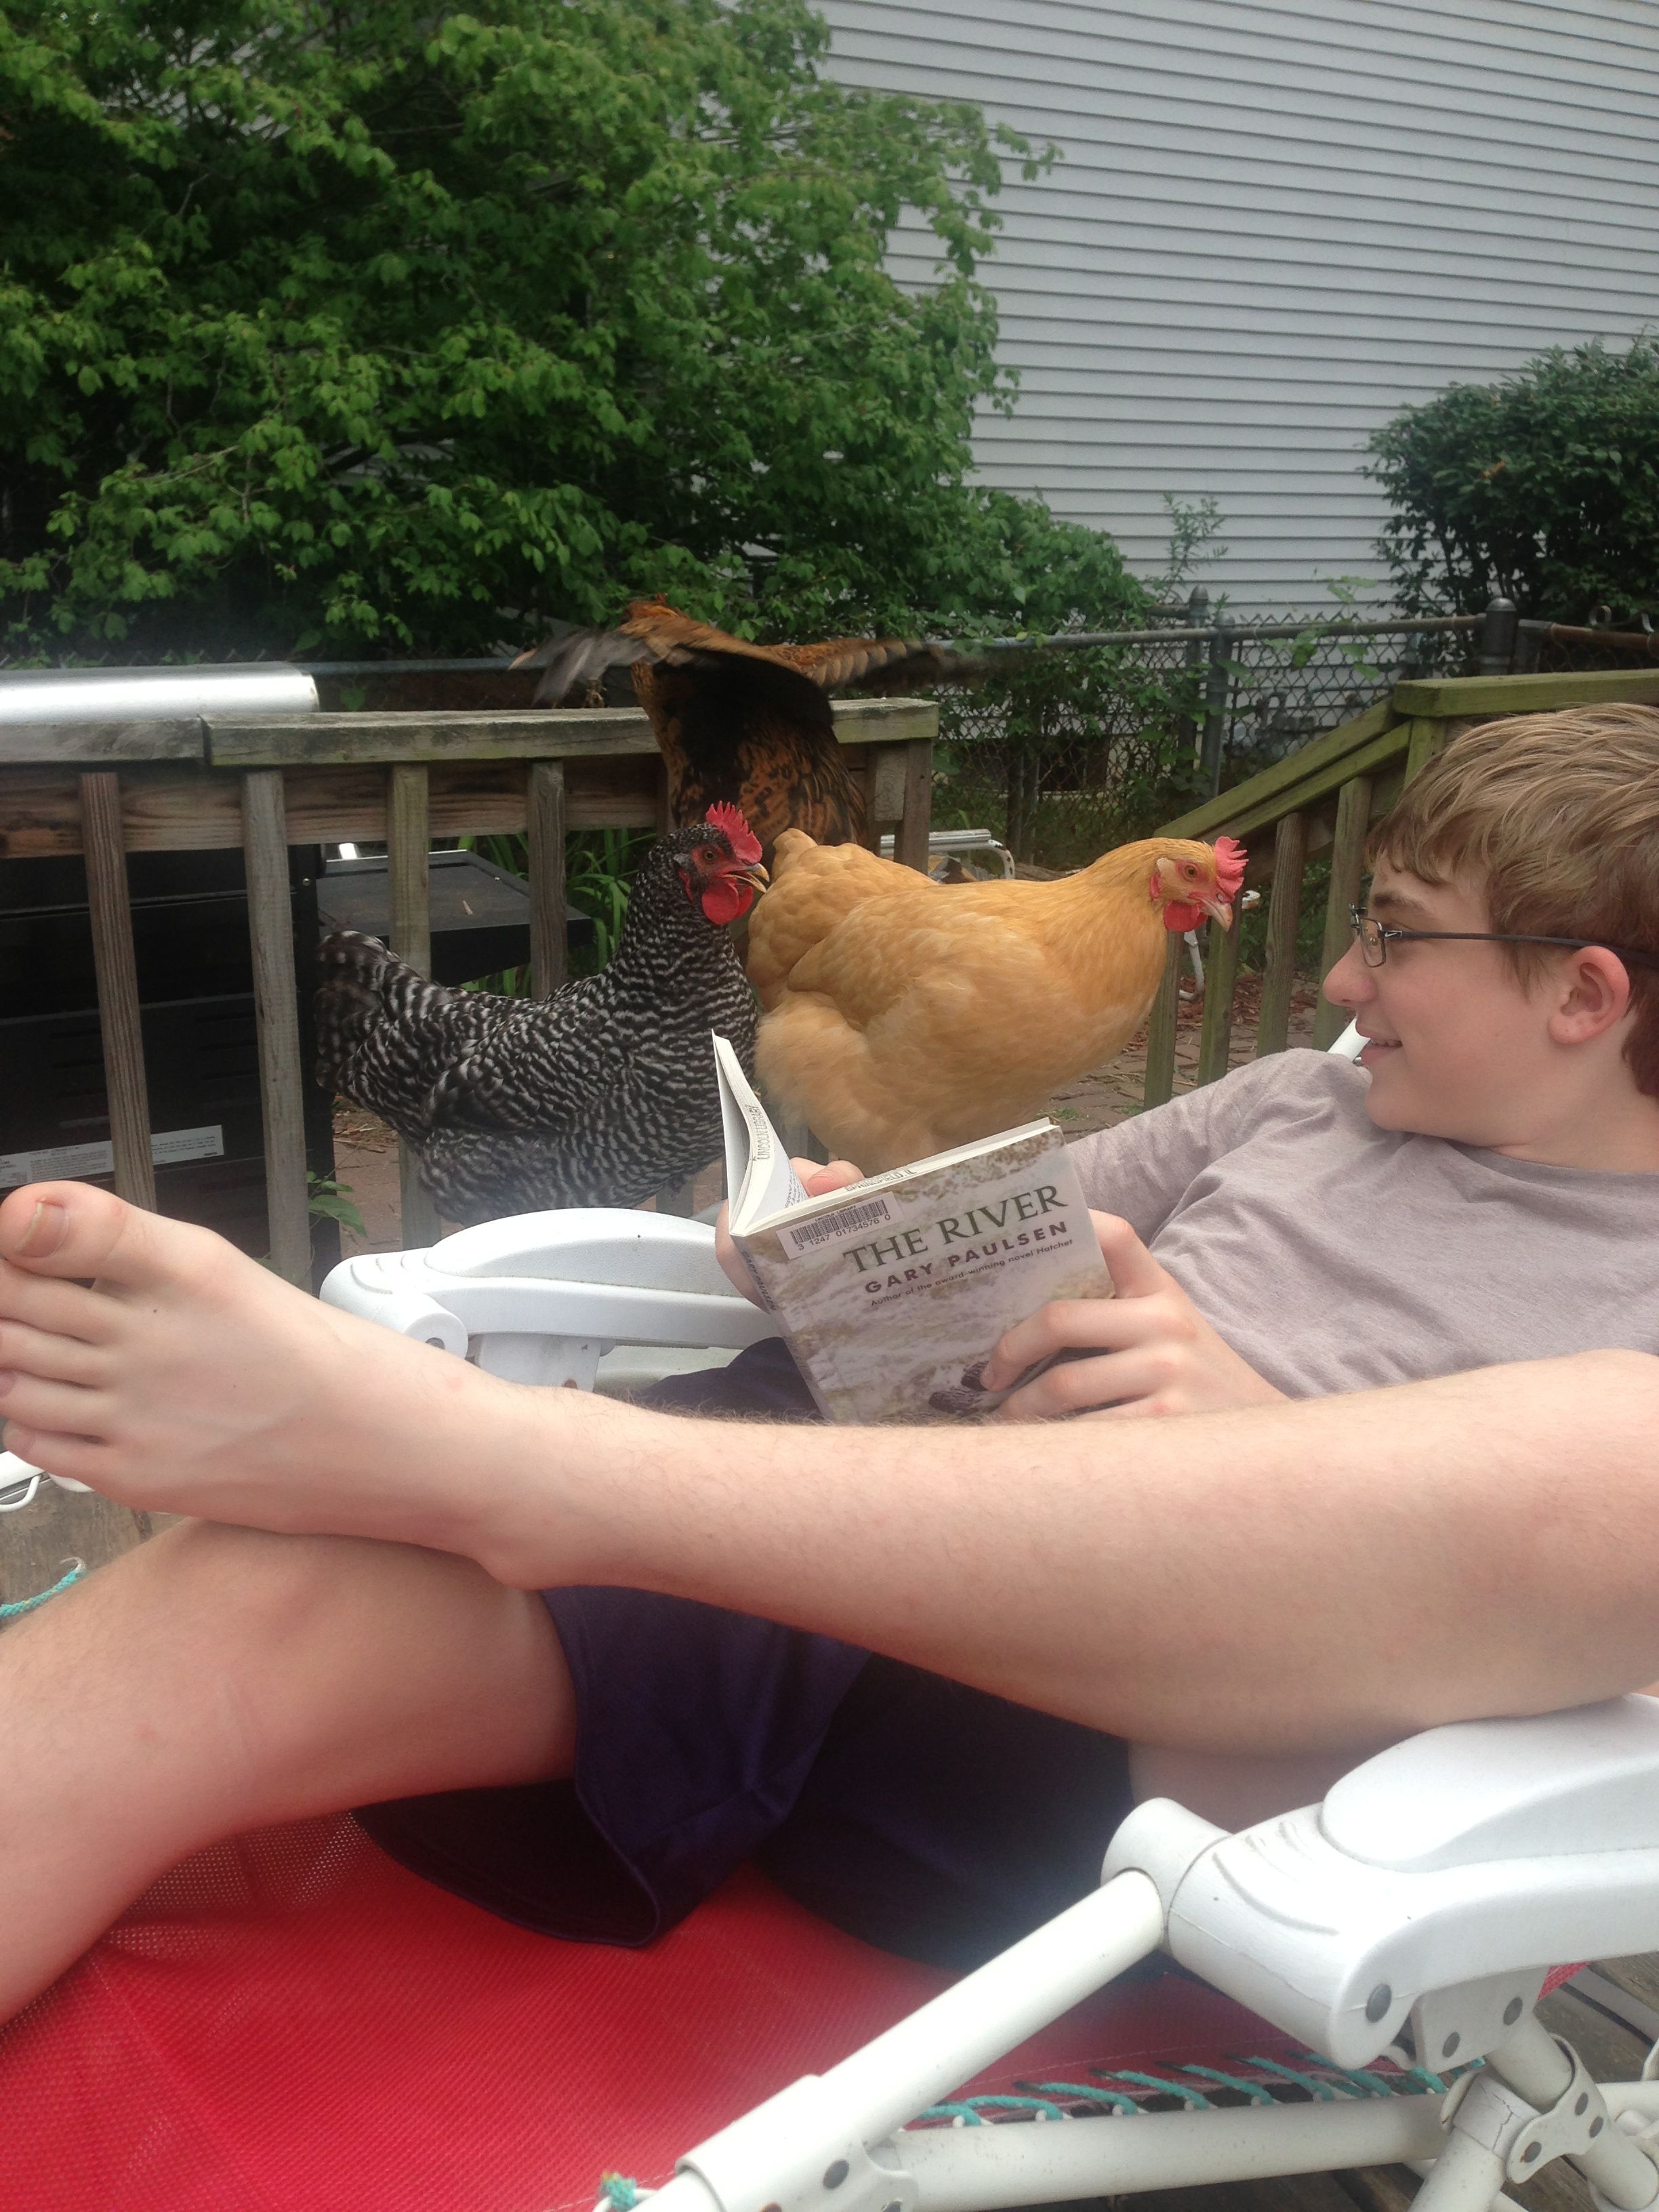 My 13 year old son reading to his "chicks" as he calls them.